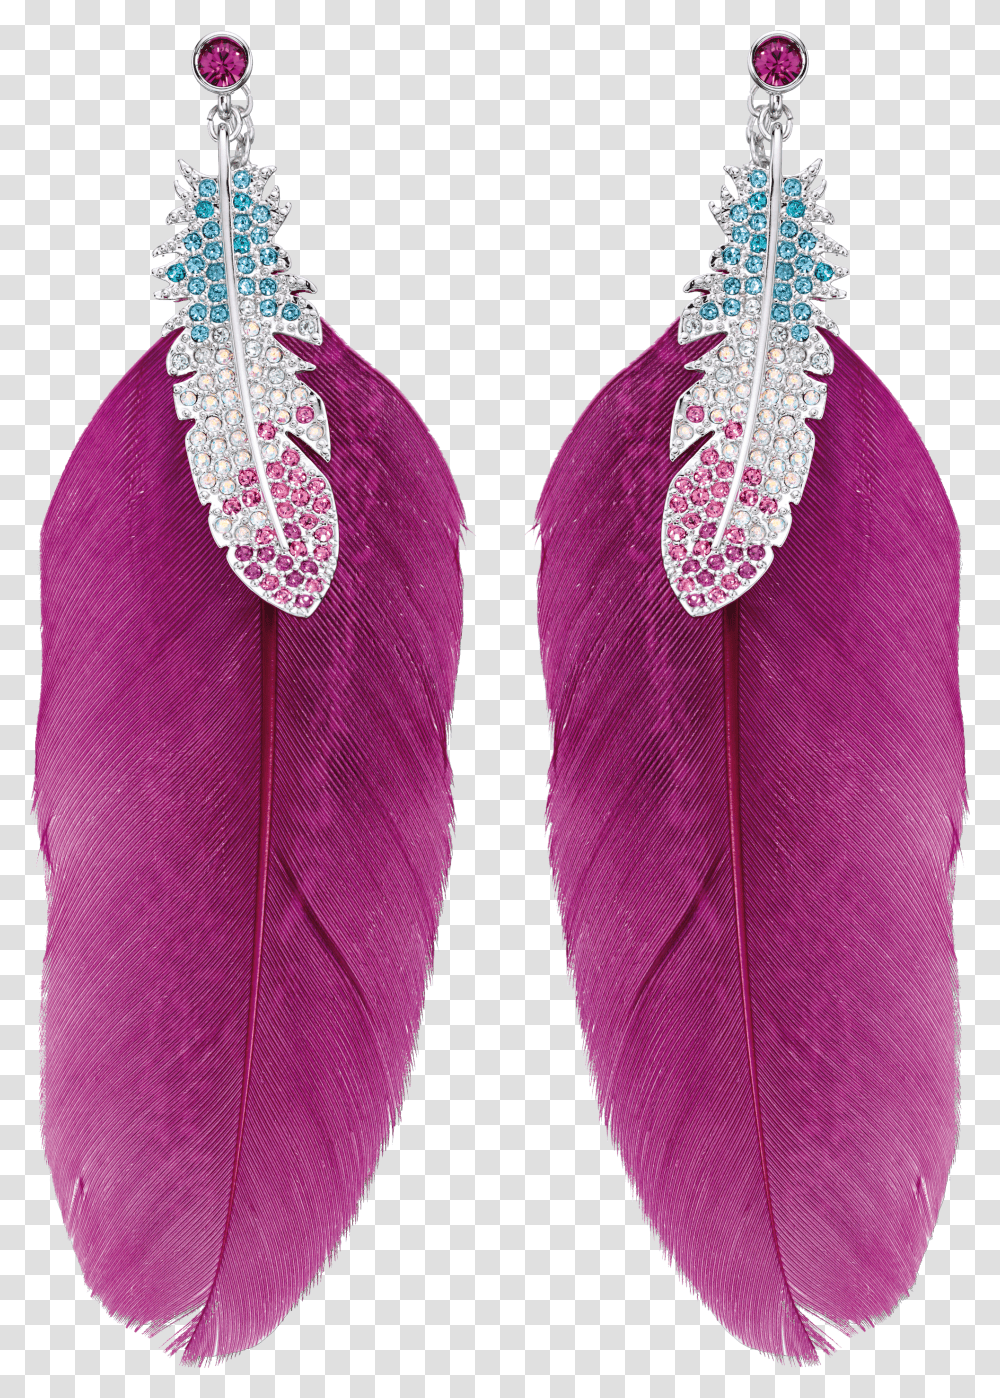 Download Feather Earrings Image For Feather Earrings Transparent Png